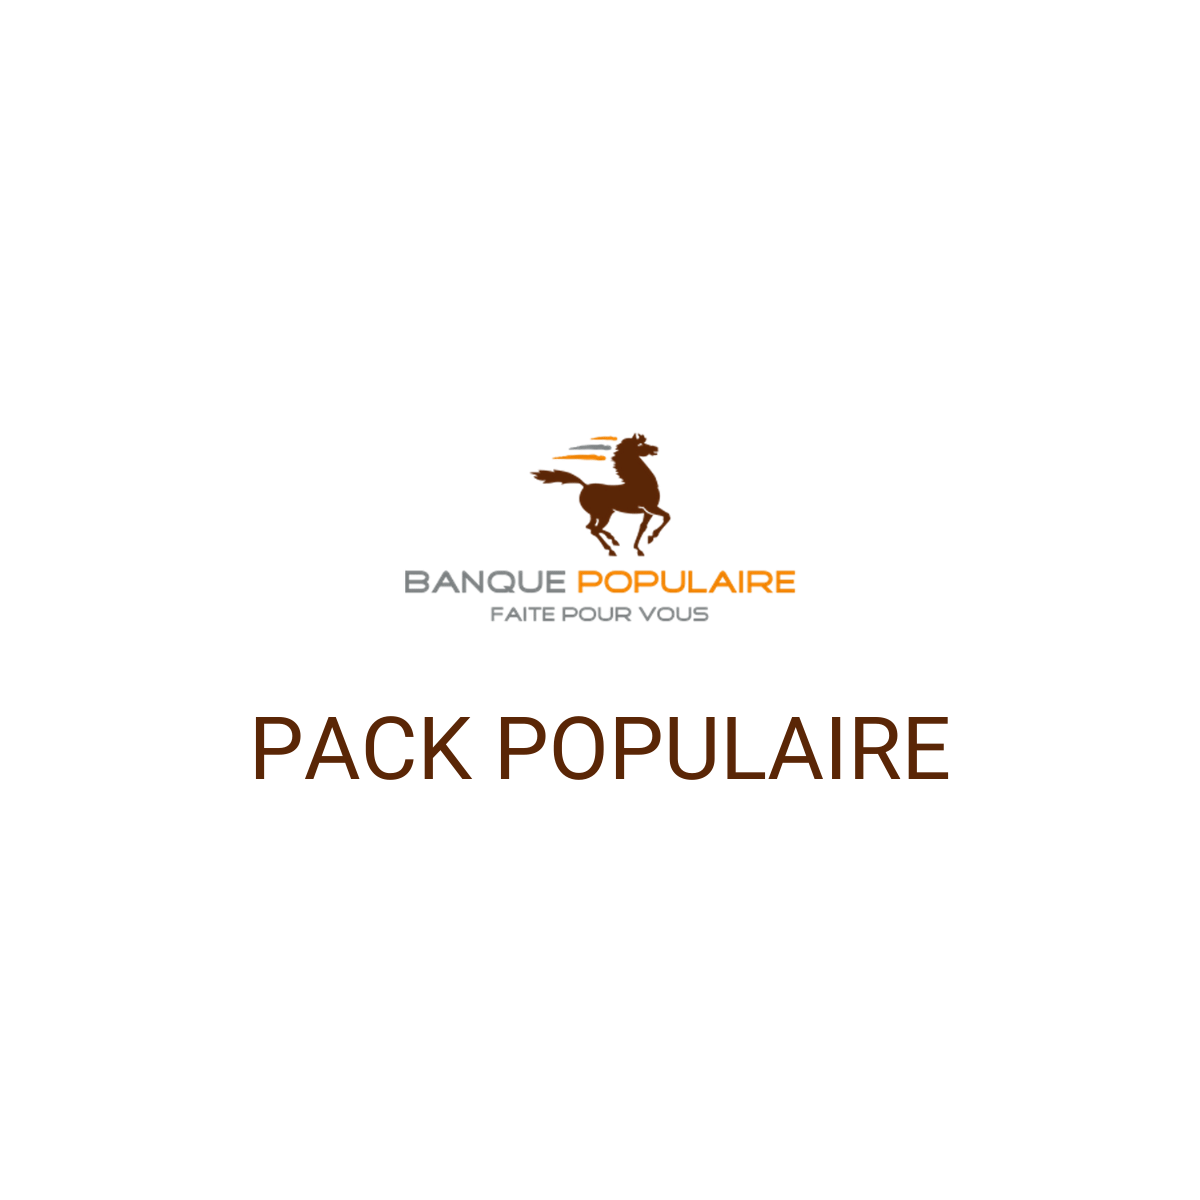 PACK POPULAIRE